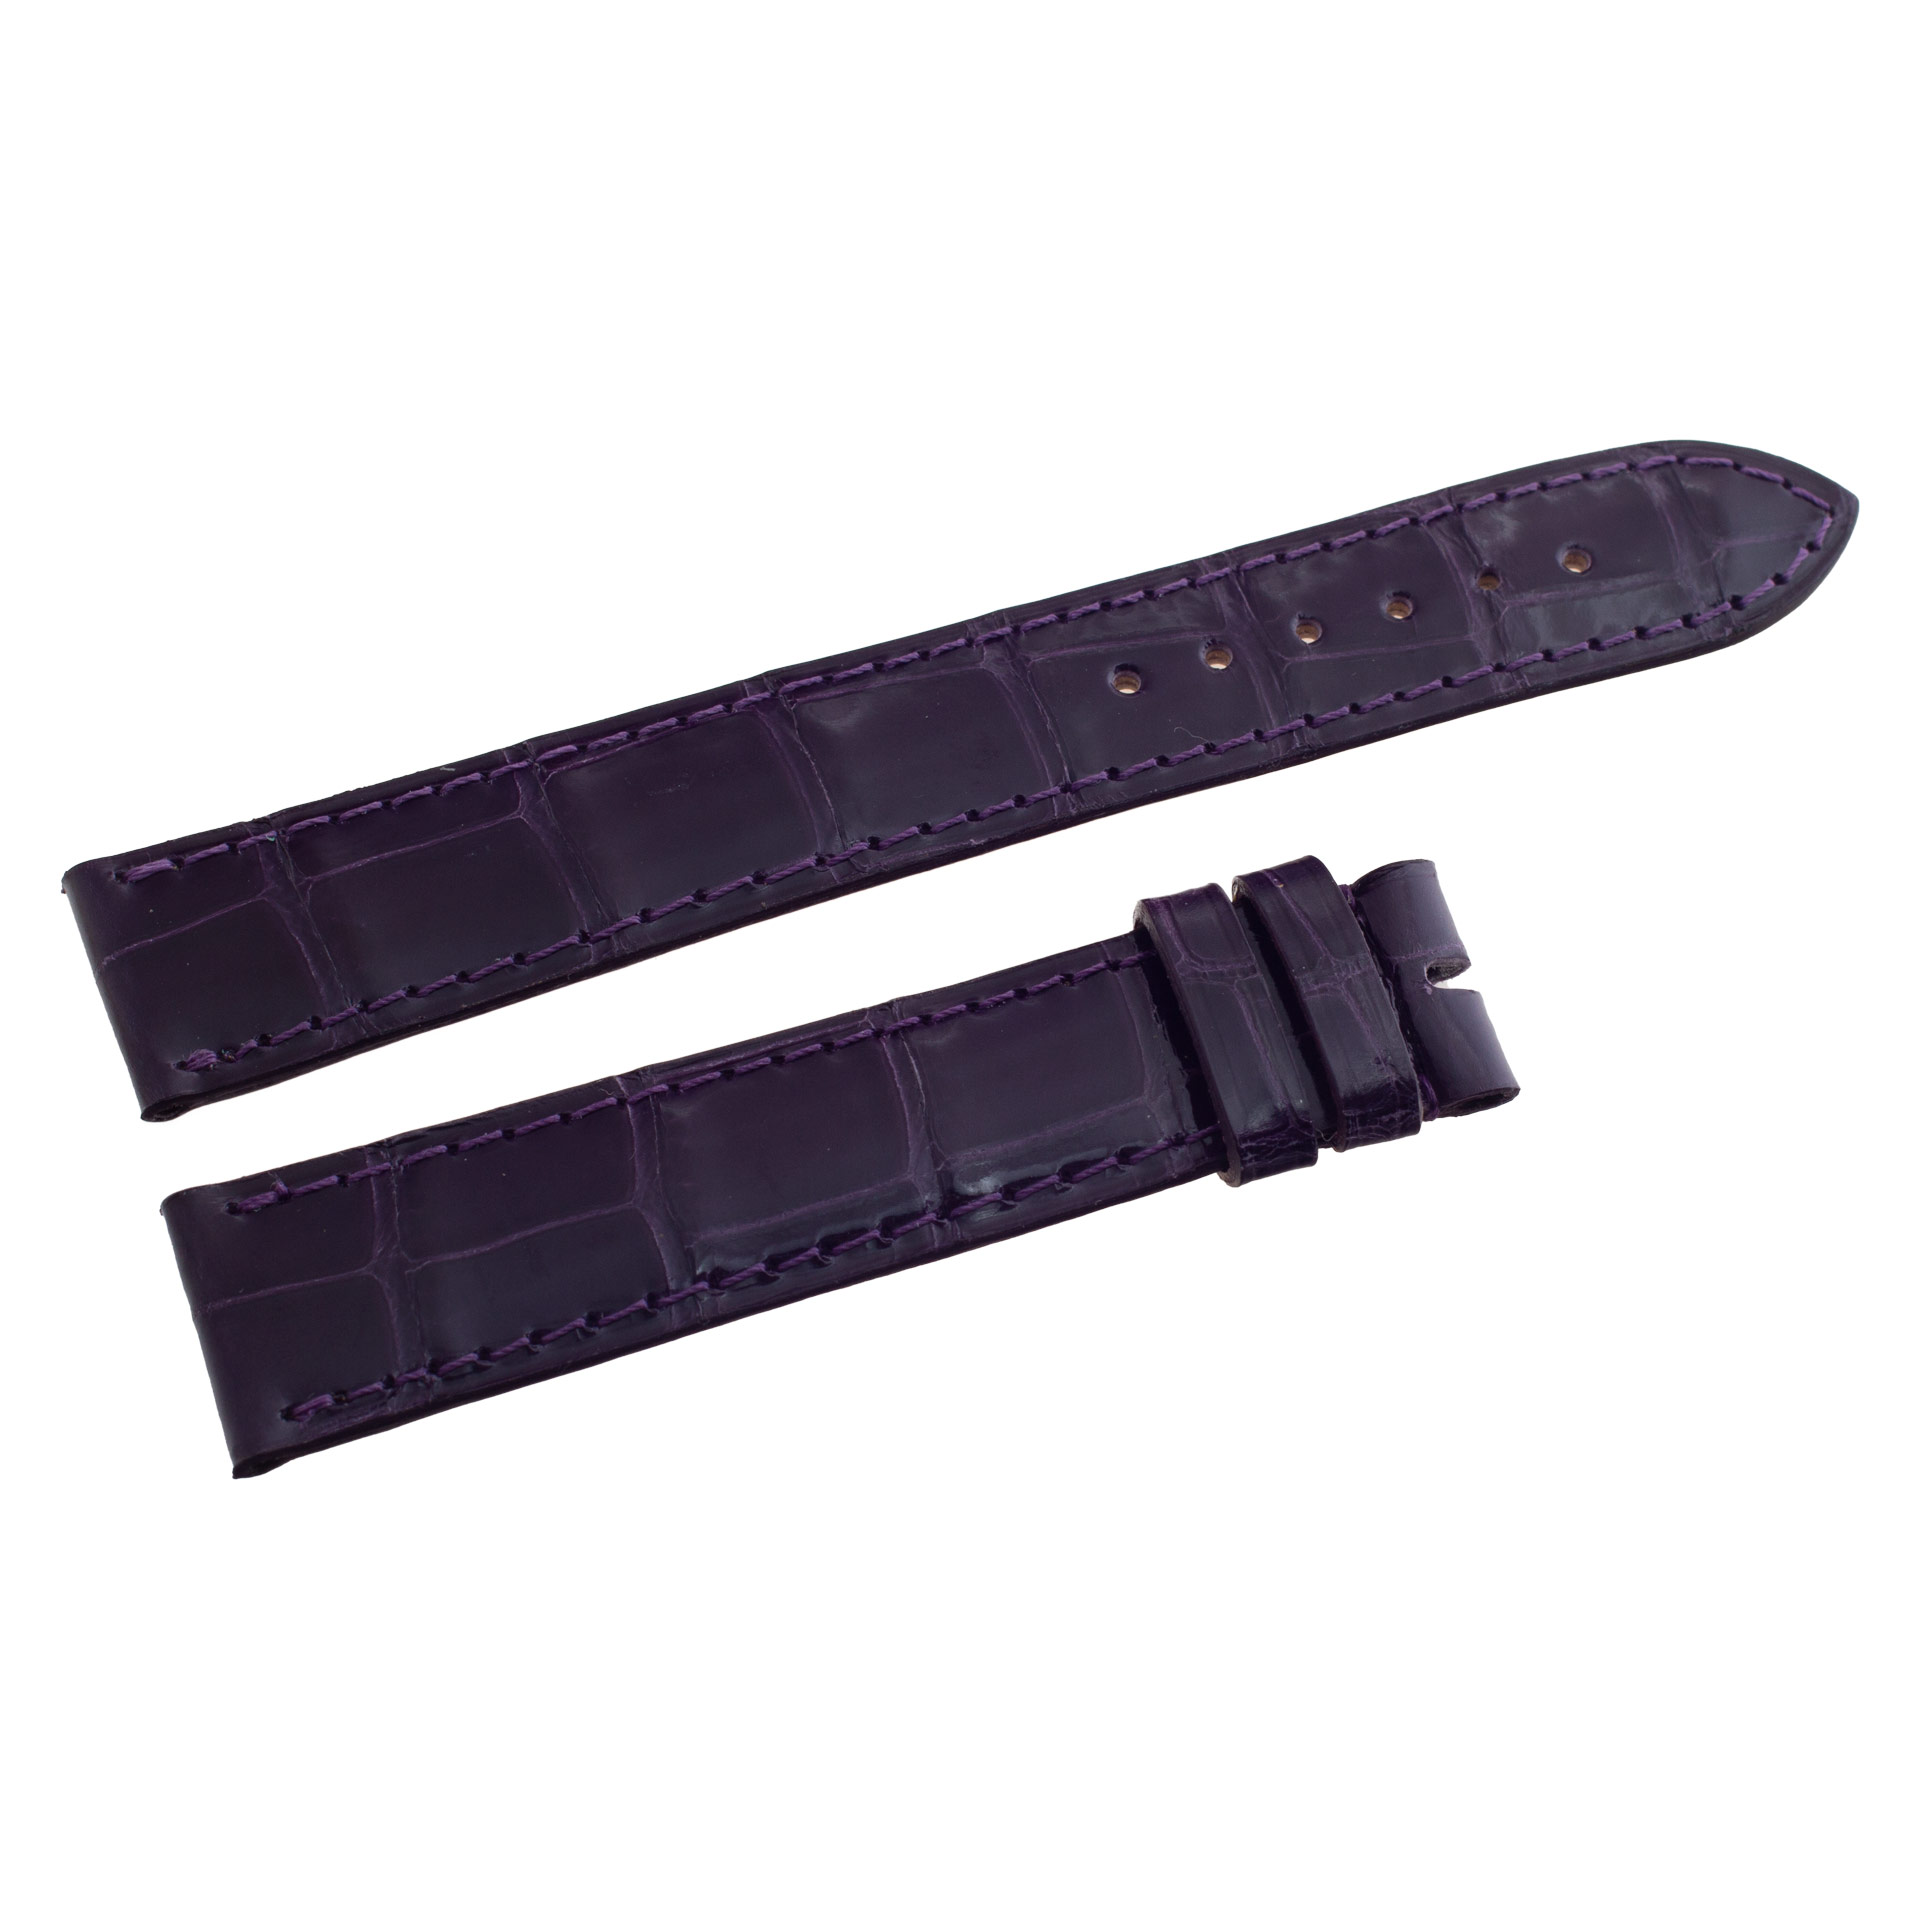 Chopard shiny purple alligator strap (18mm x 16mm) Length is 4.5" (long piece) and 3.0" (short piece). 18mm width at lug end and 16mm width at buckle end